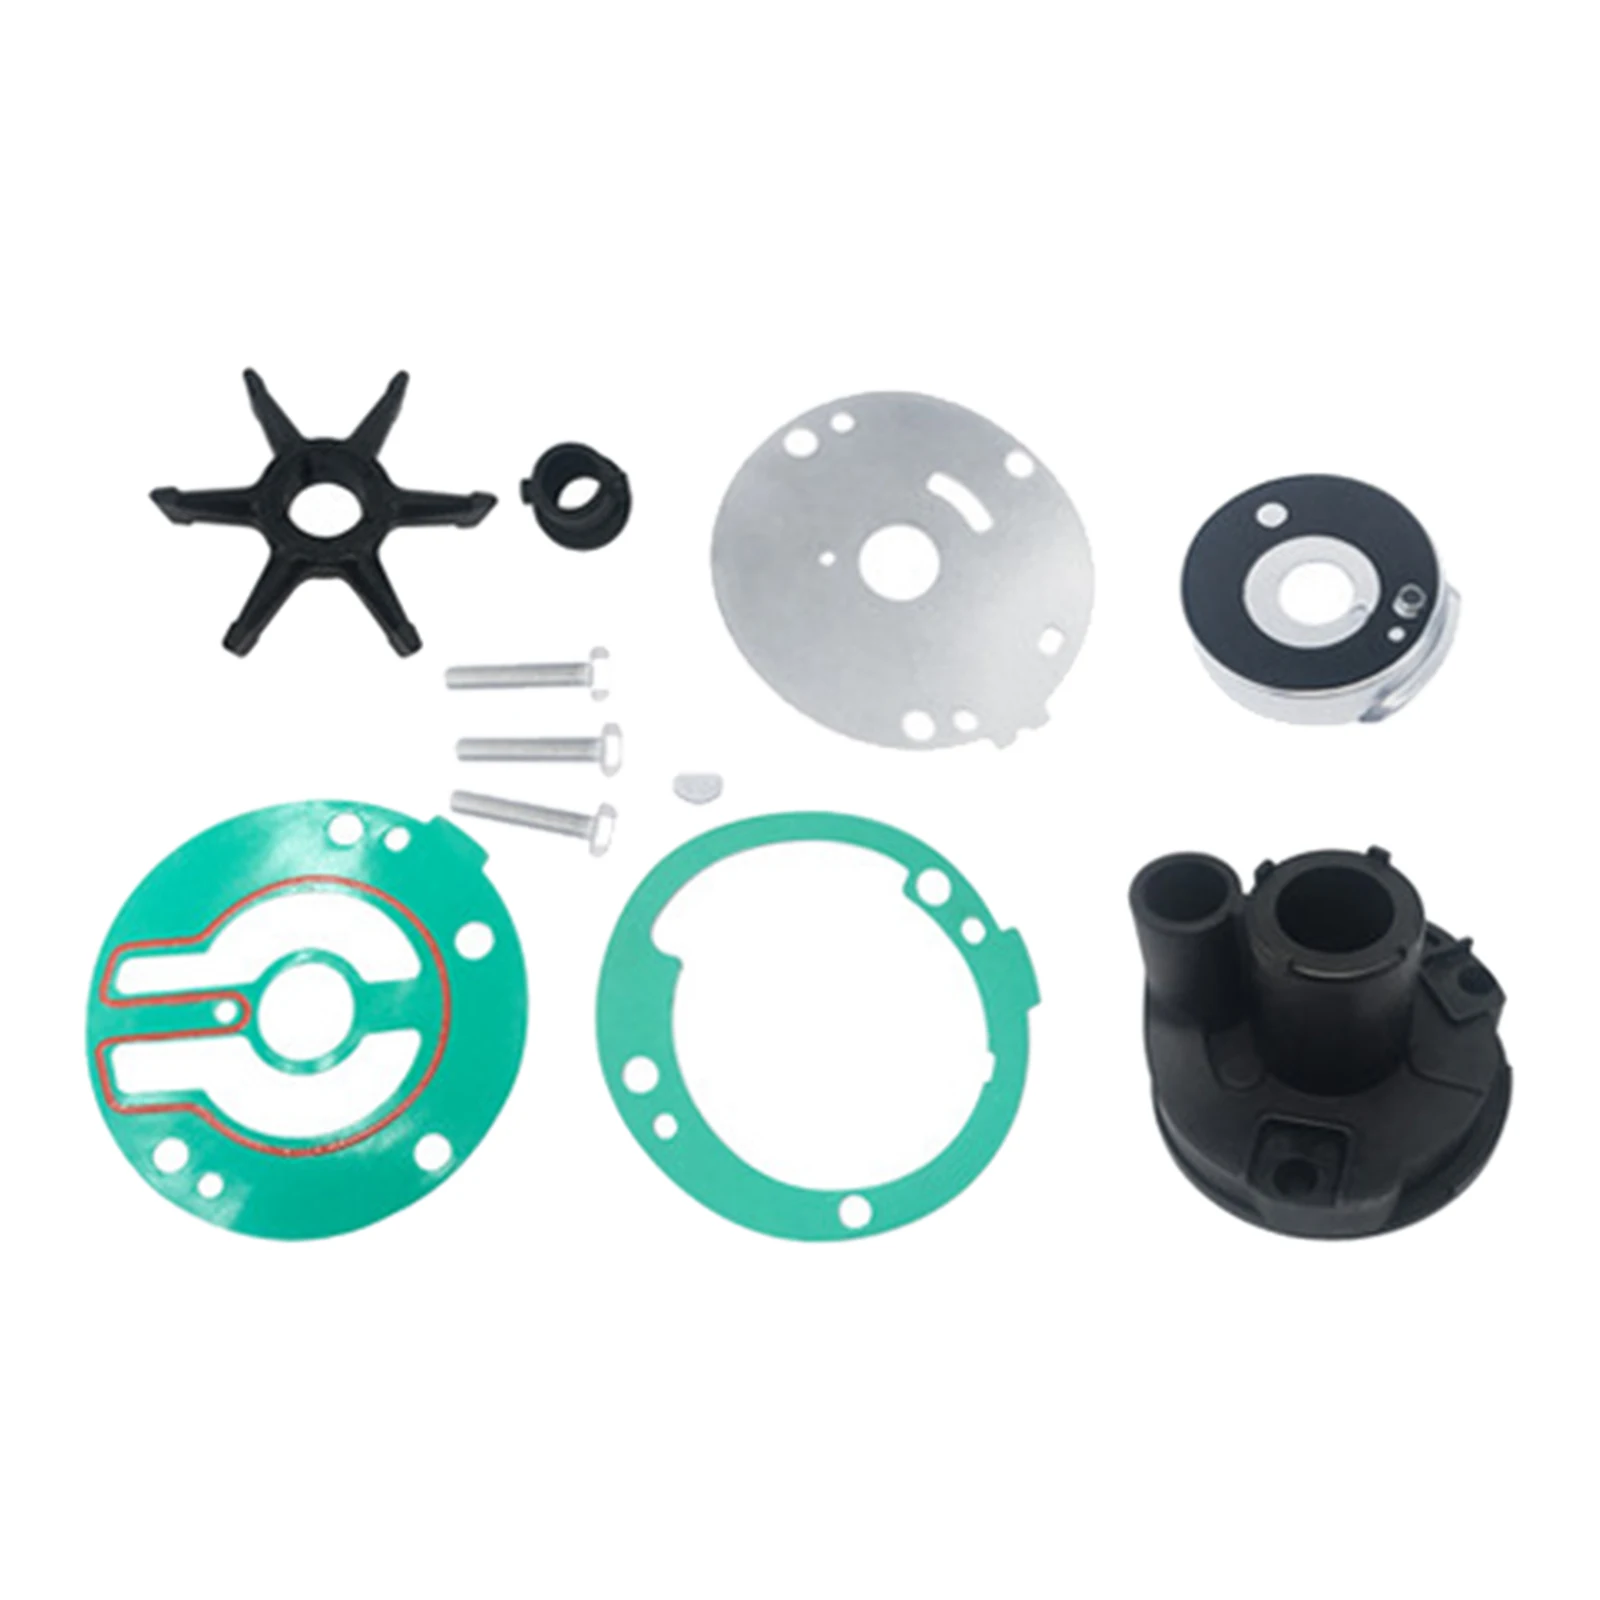 689-W0078 Water Pump Impeller Repair Kit for Yamaha 25HP 30HP 18-3427 689-W0078-04-00 689-W0078-06 Outboard Engines Replace